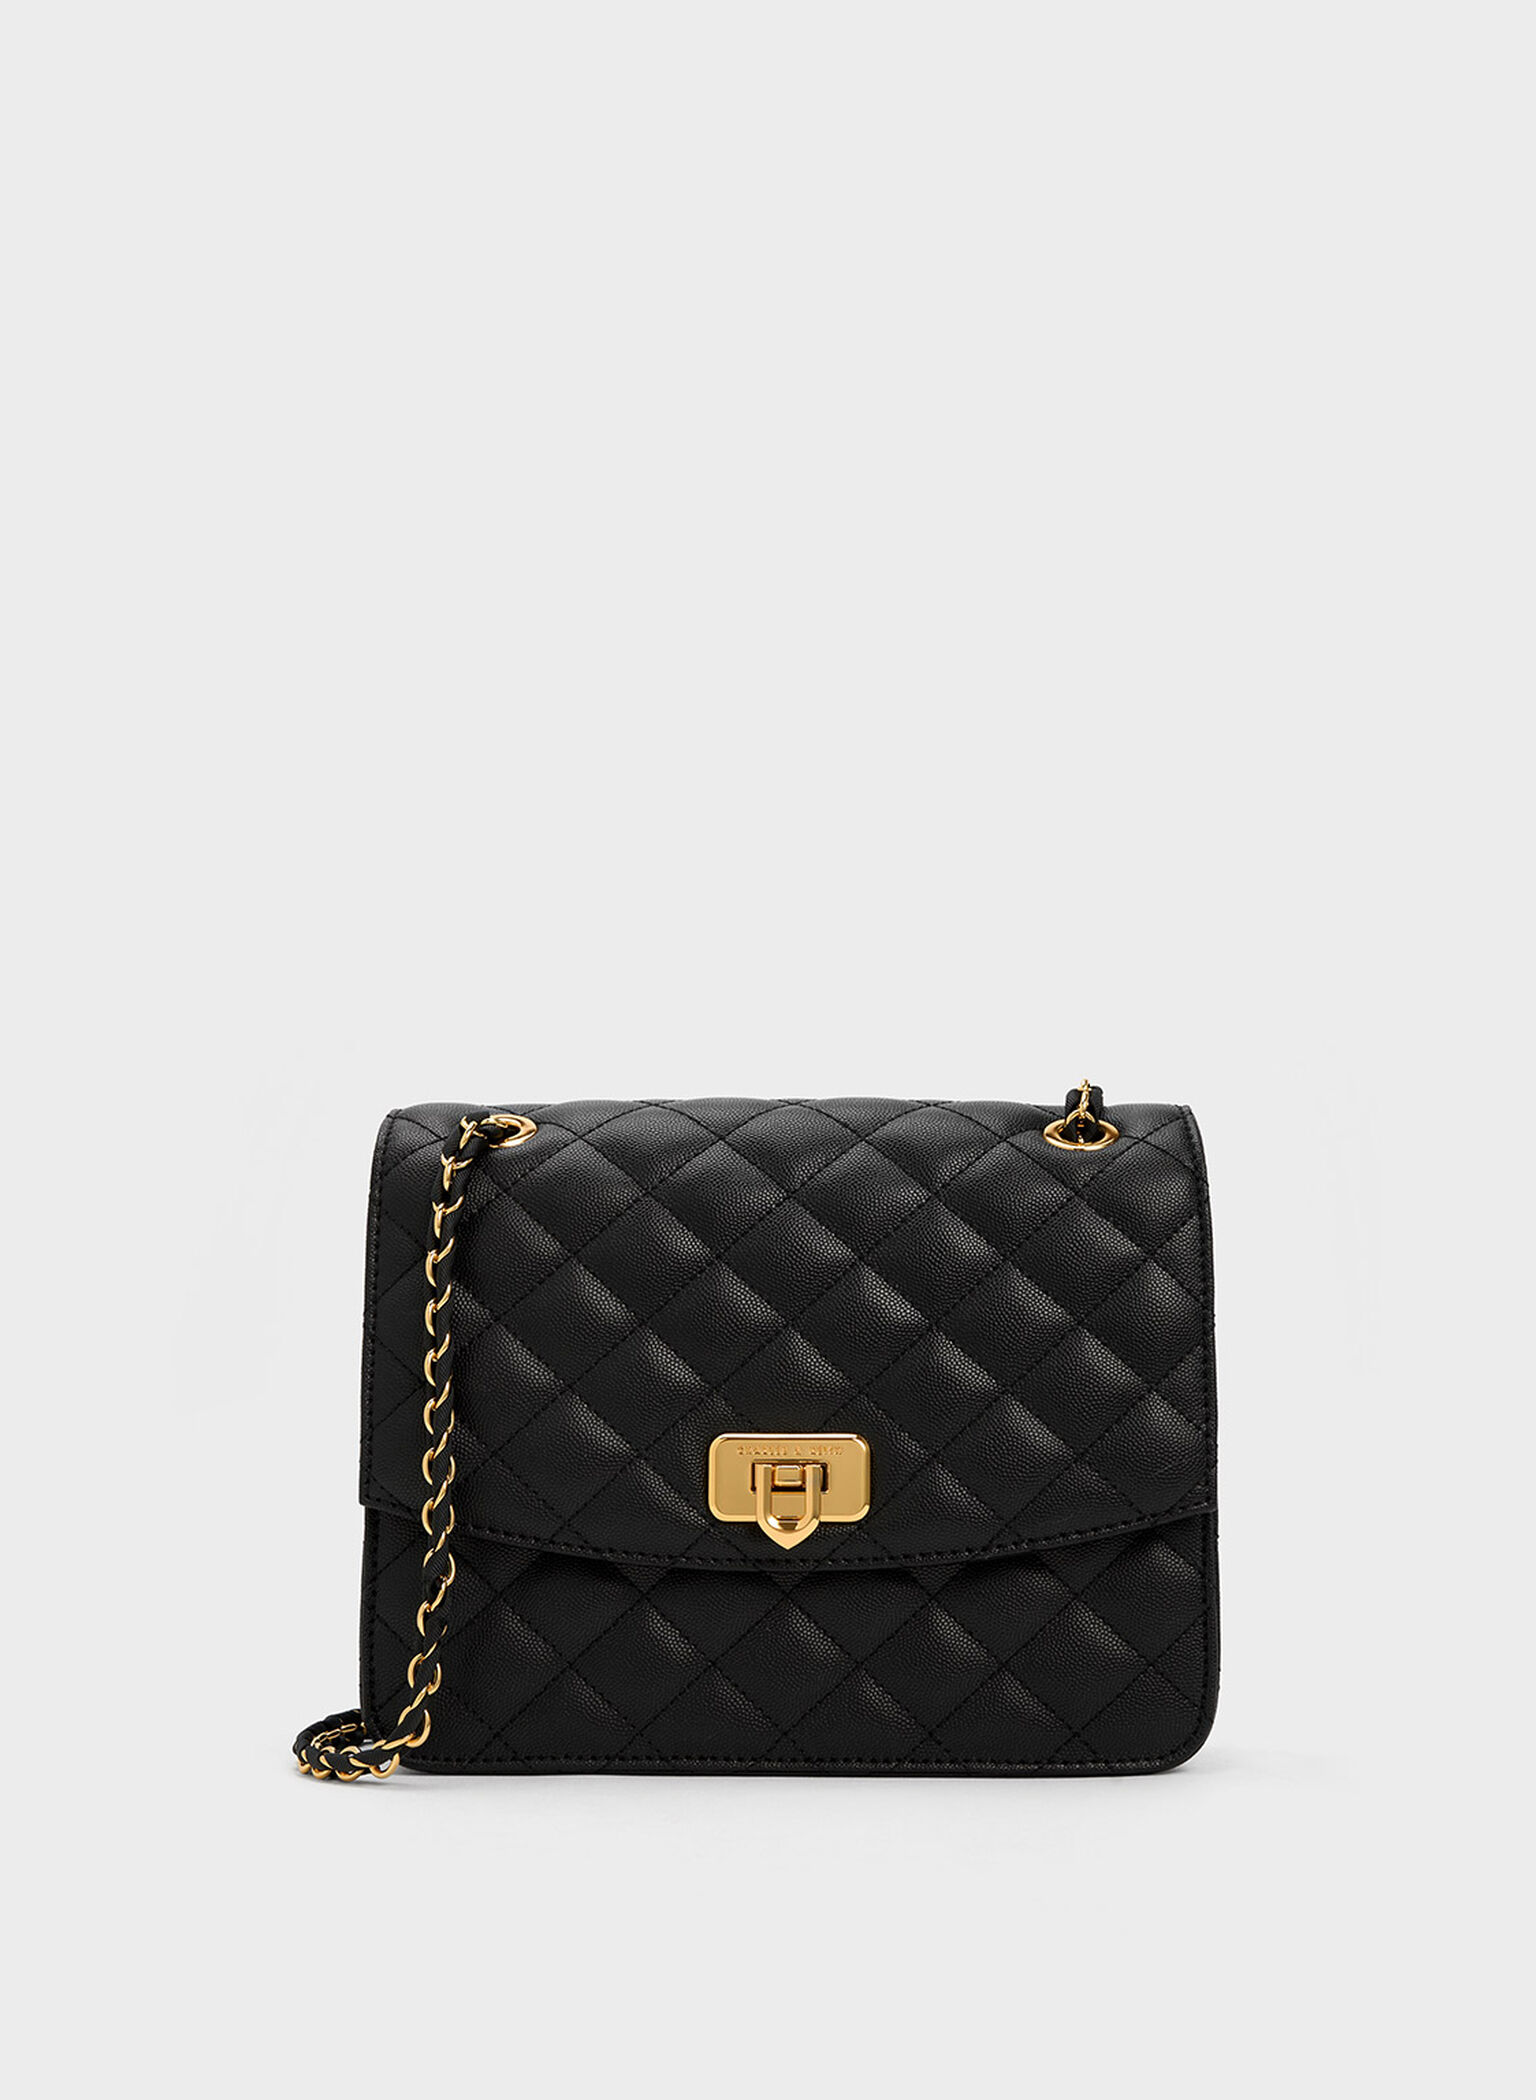 Black Cressida Quilted Chain Strap Bag - CHARLES & KEITH US